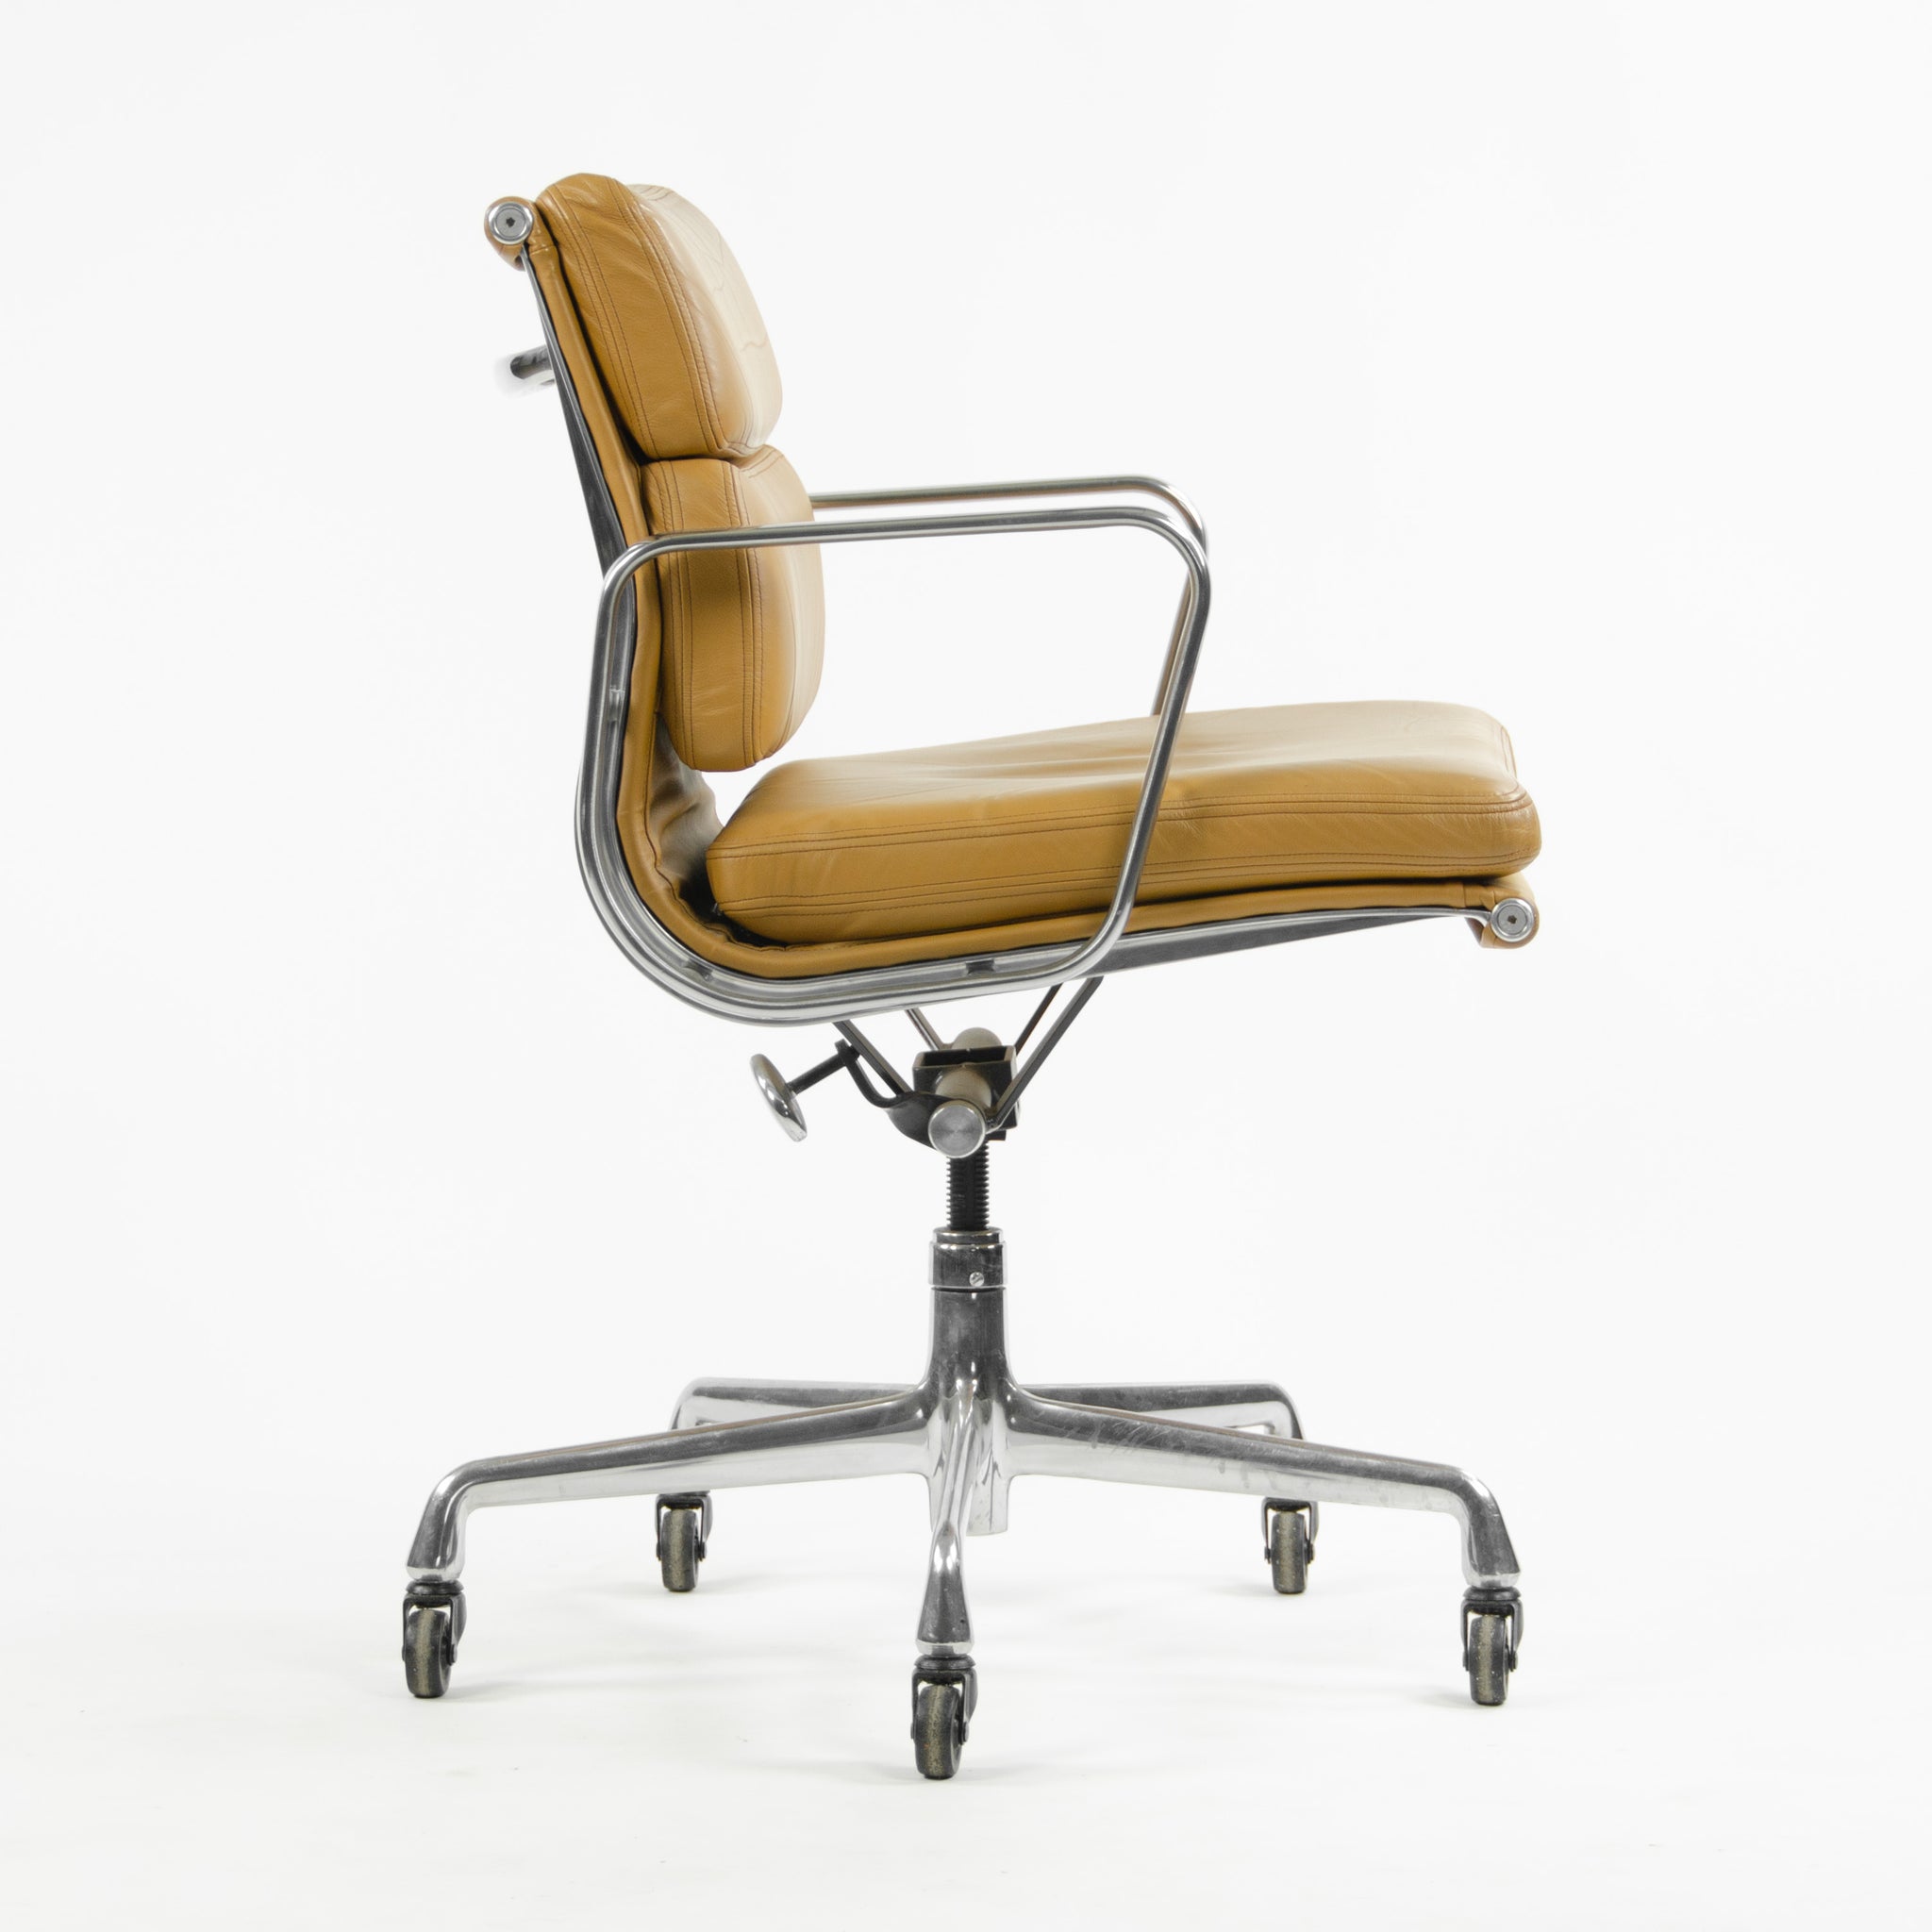 SOLD Herman Miller Eames Soft Pad Aluminum Group Chair Cognac Leather 2006